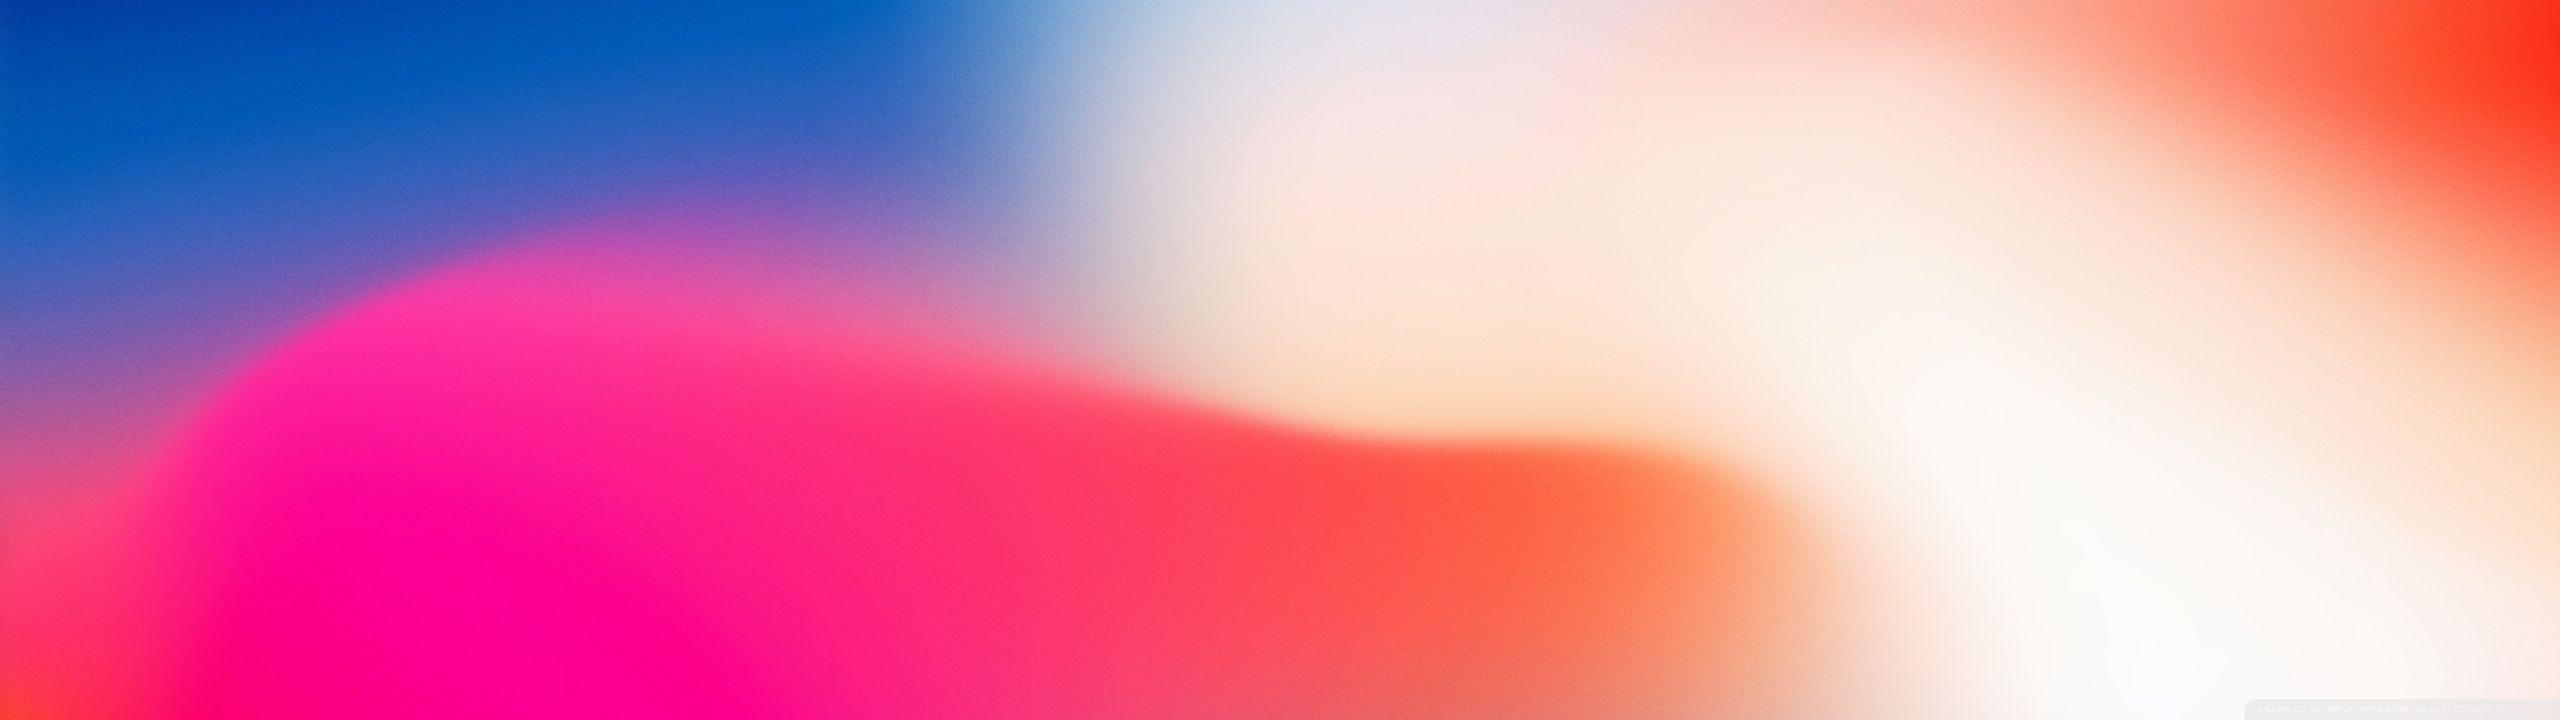 iPhone X Wallpapers for Mac OS ❤ 4K HD Desktop Wallpapers for